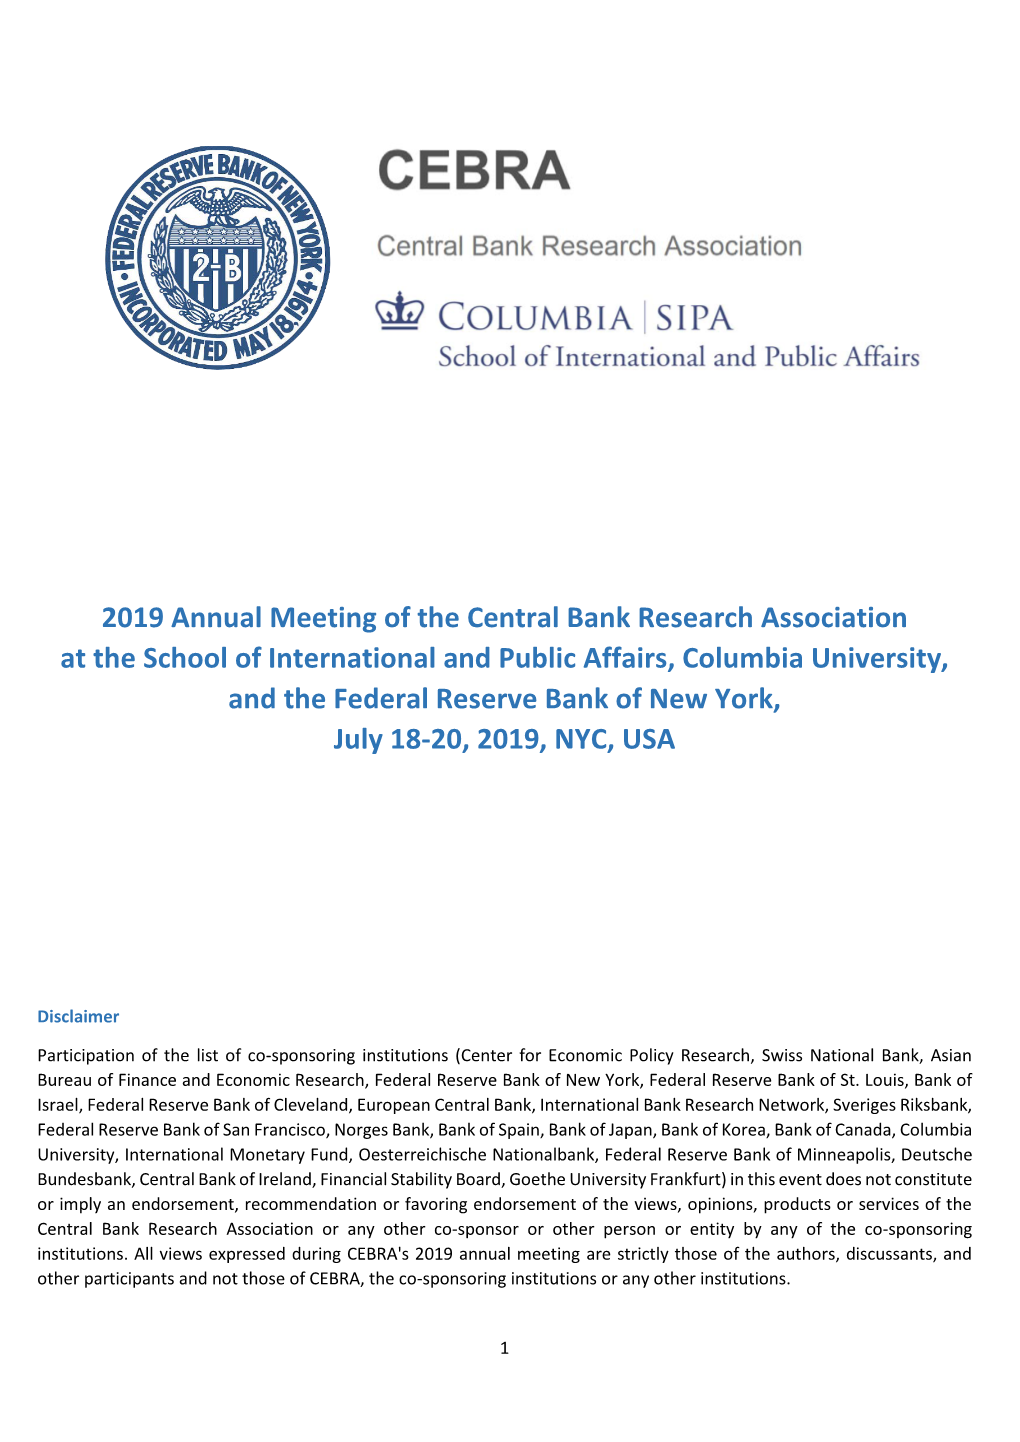 2019 Annual Meeting of the Central Bank Research Association at The